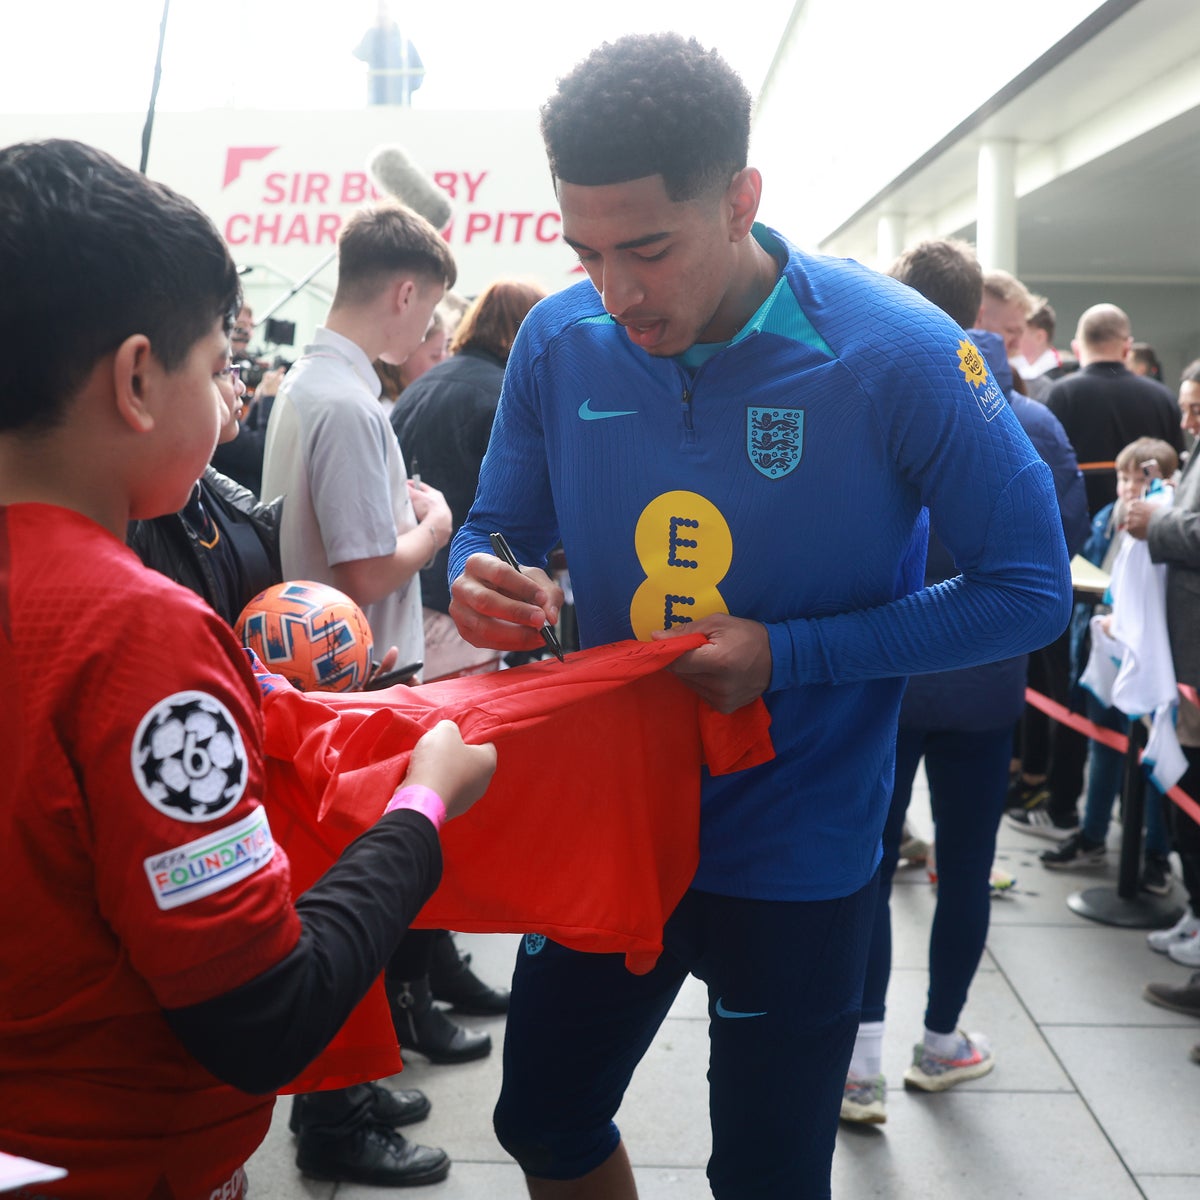 Jude Bellingham: Liverpool FC transfer target spotted signing fan's shirt while on England duty | Evening Standard